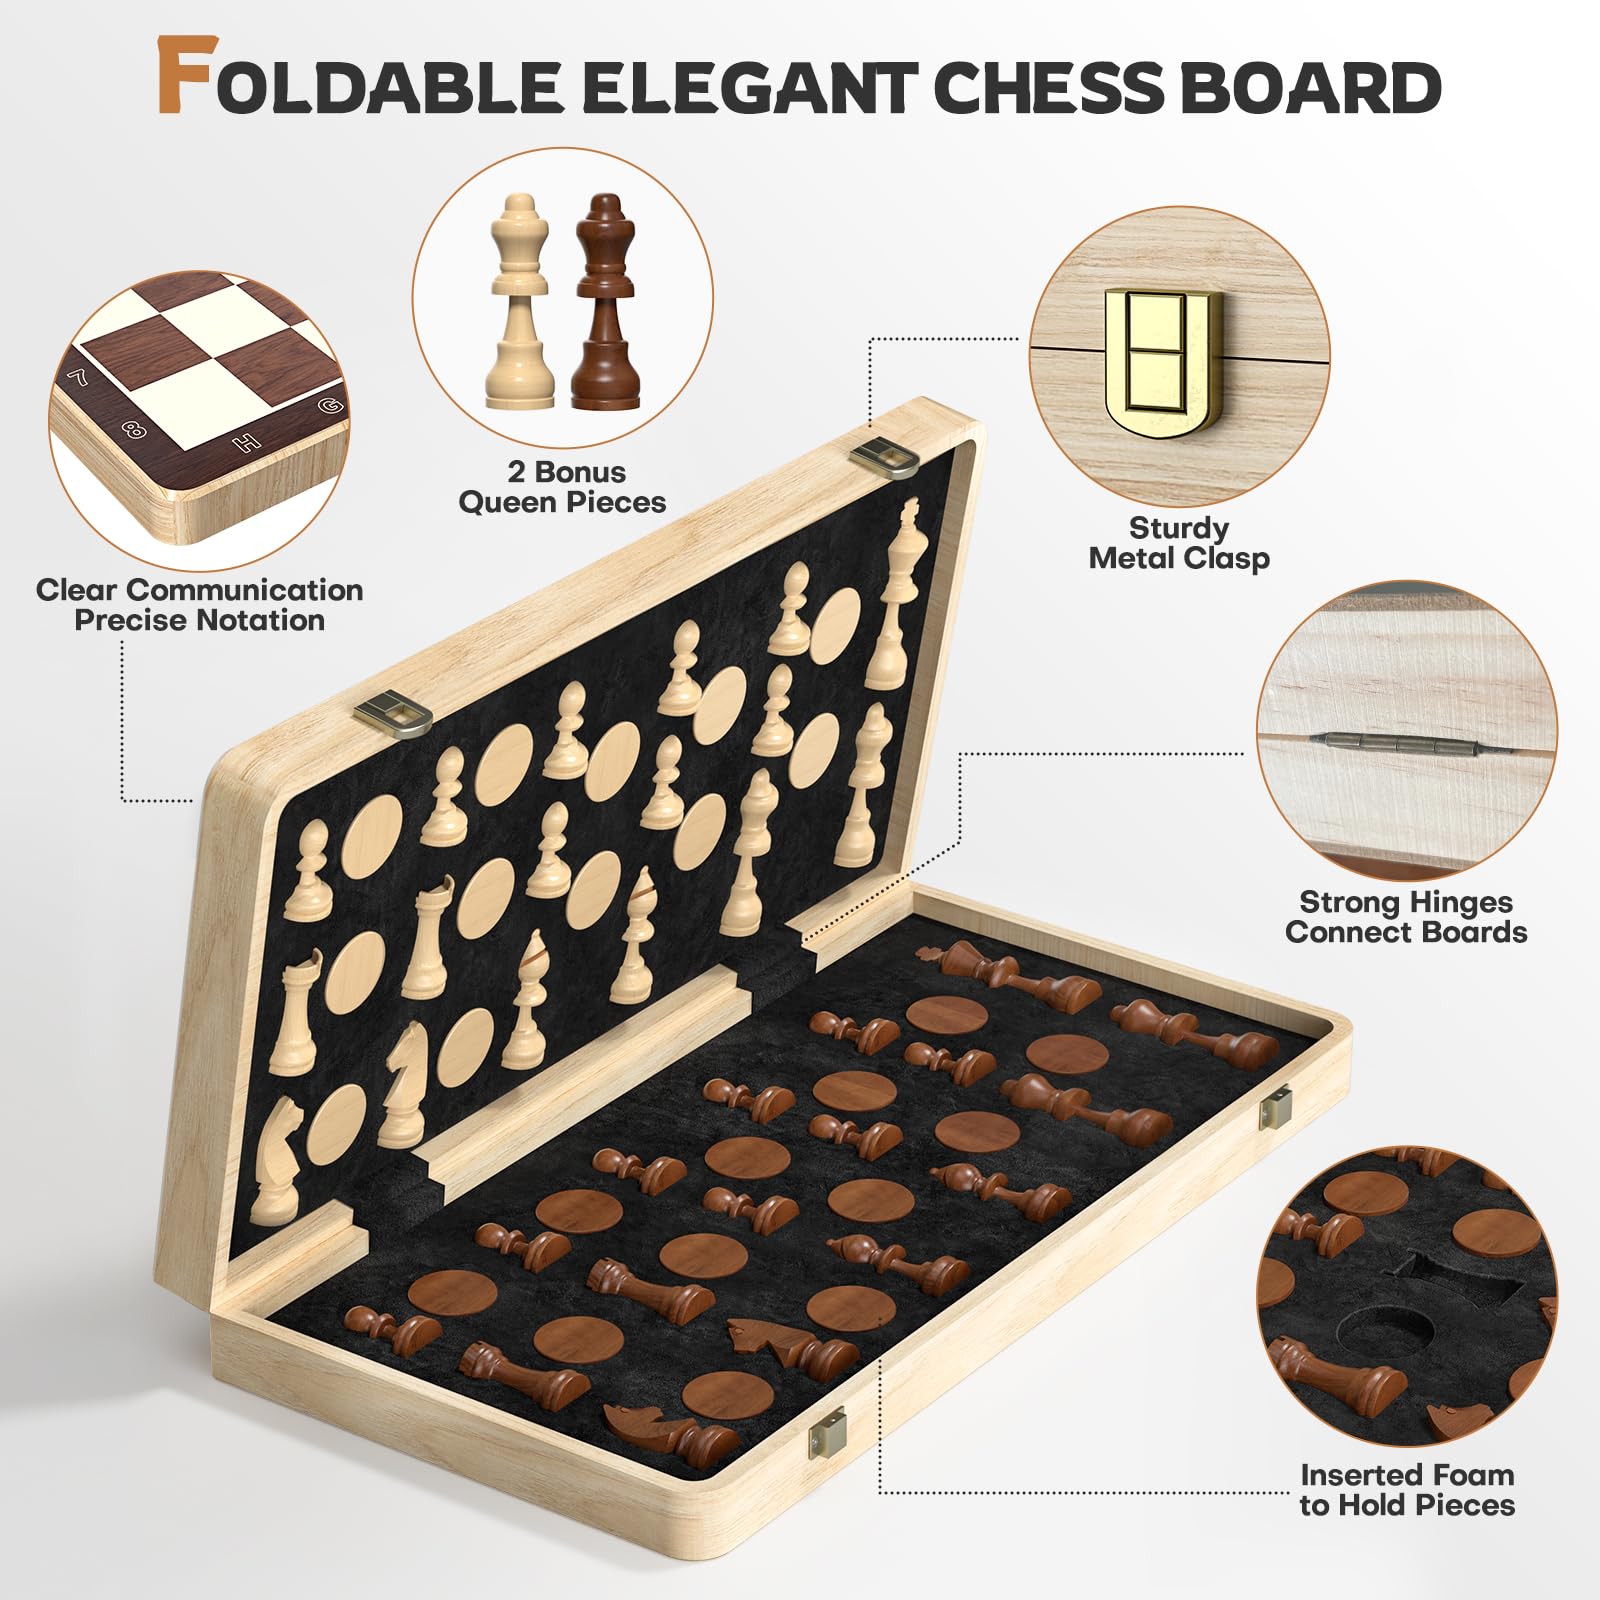 Magnetic Chess Set with Checkers - Meuzhen 16